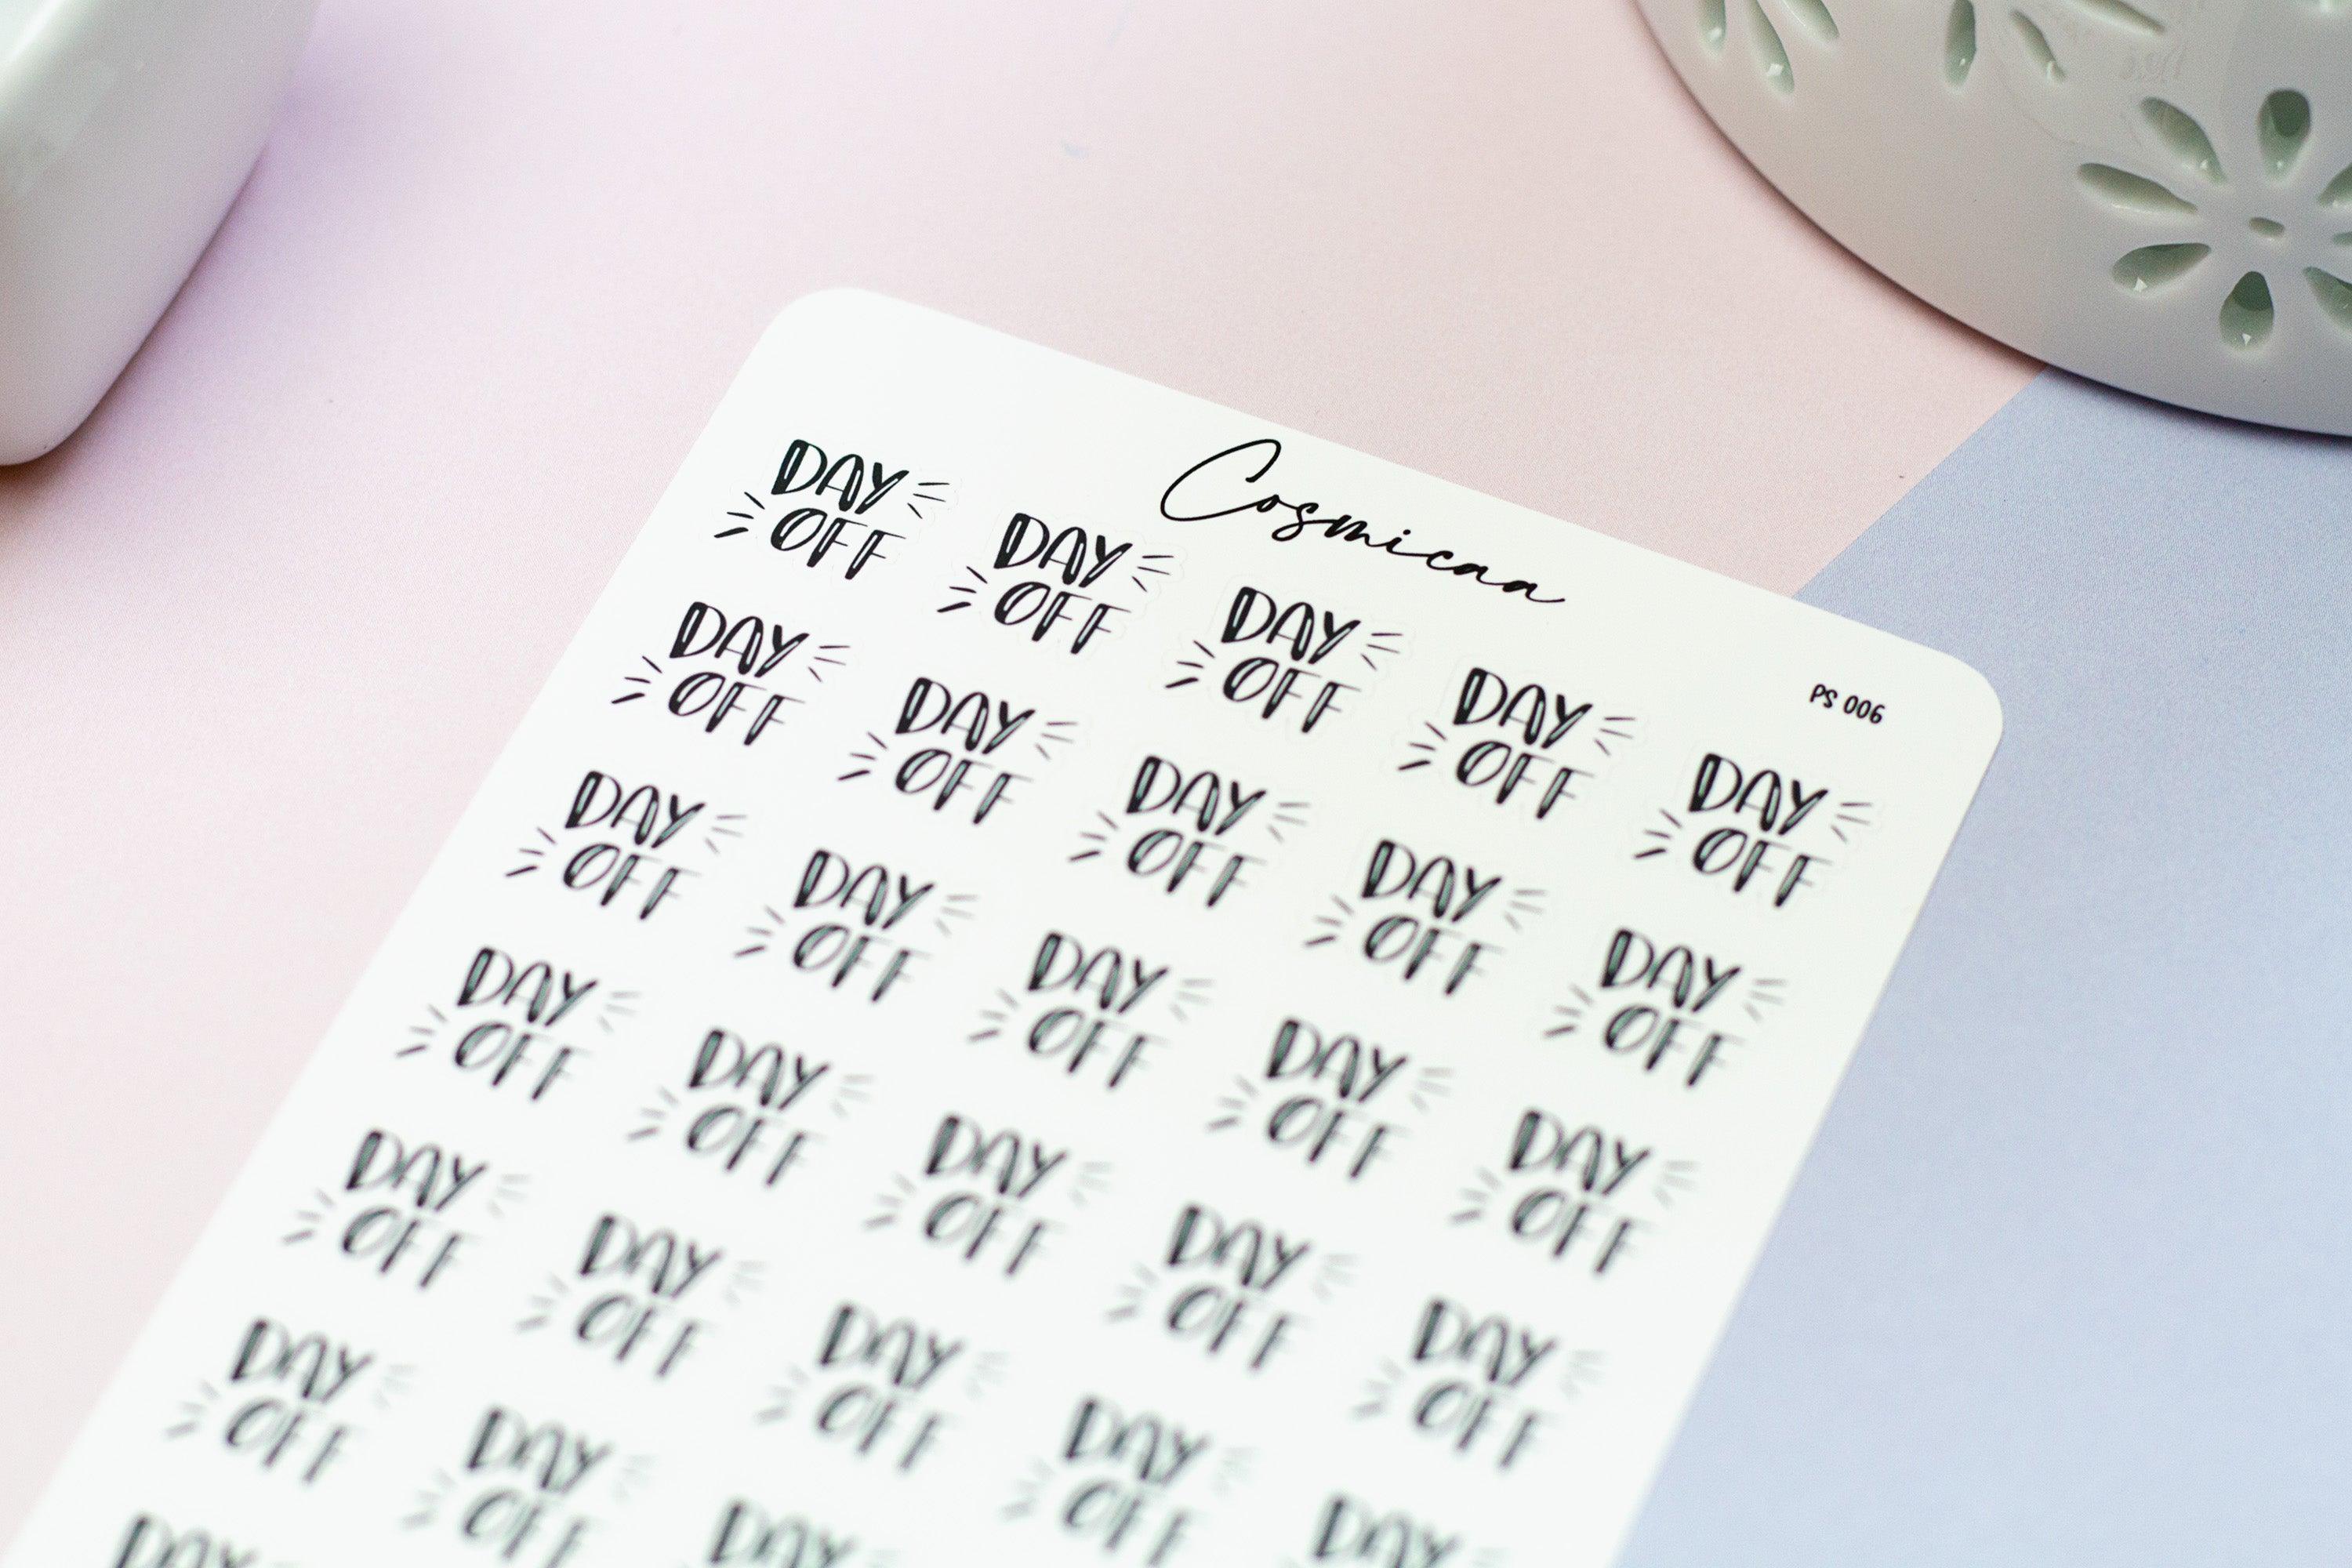 Day Off - Planner stickers [New format] - Cosmicaa